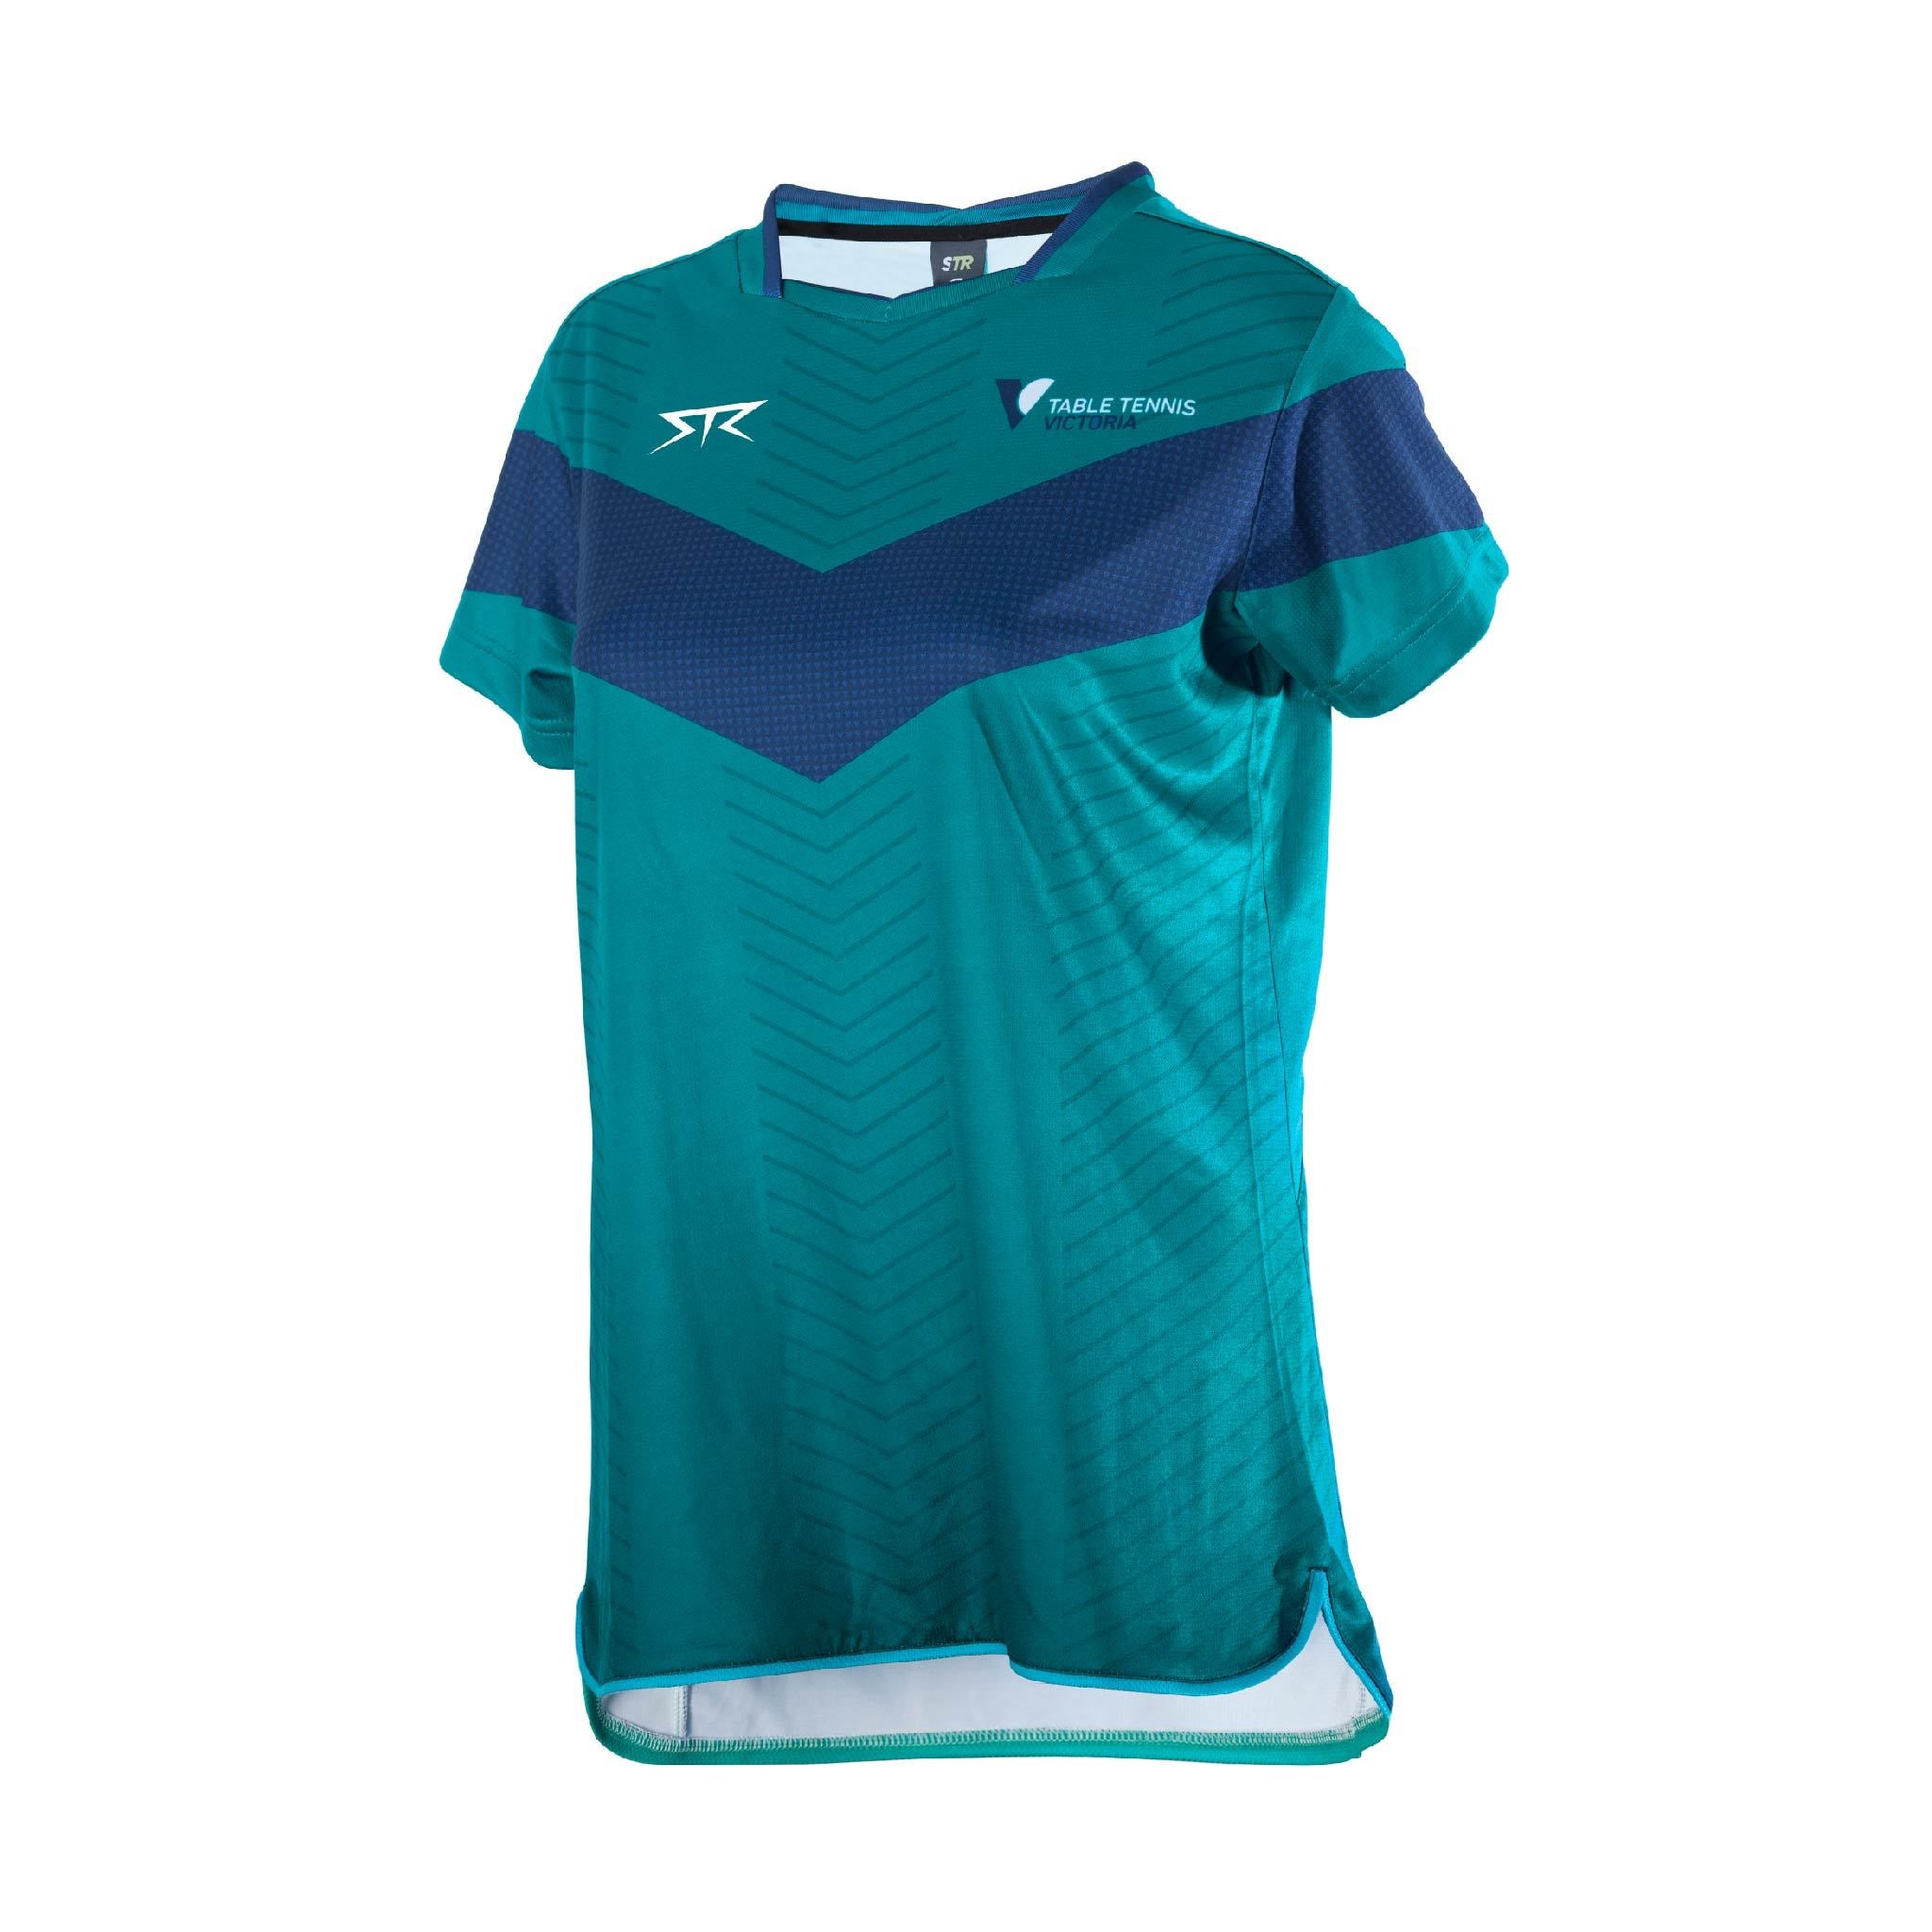 TTV Women's Competition Shirt Teal